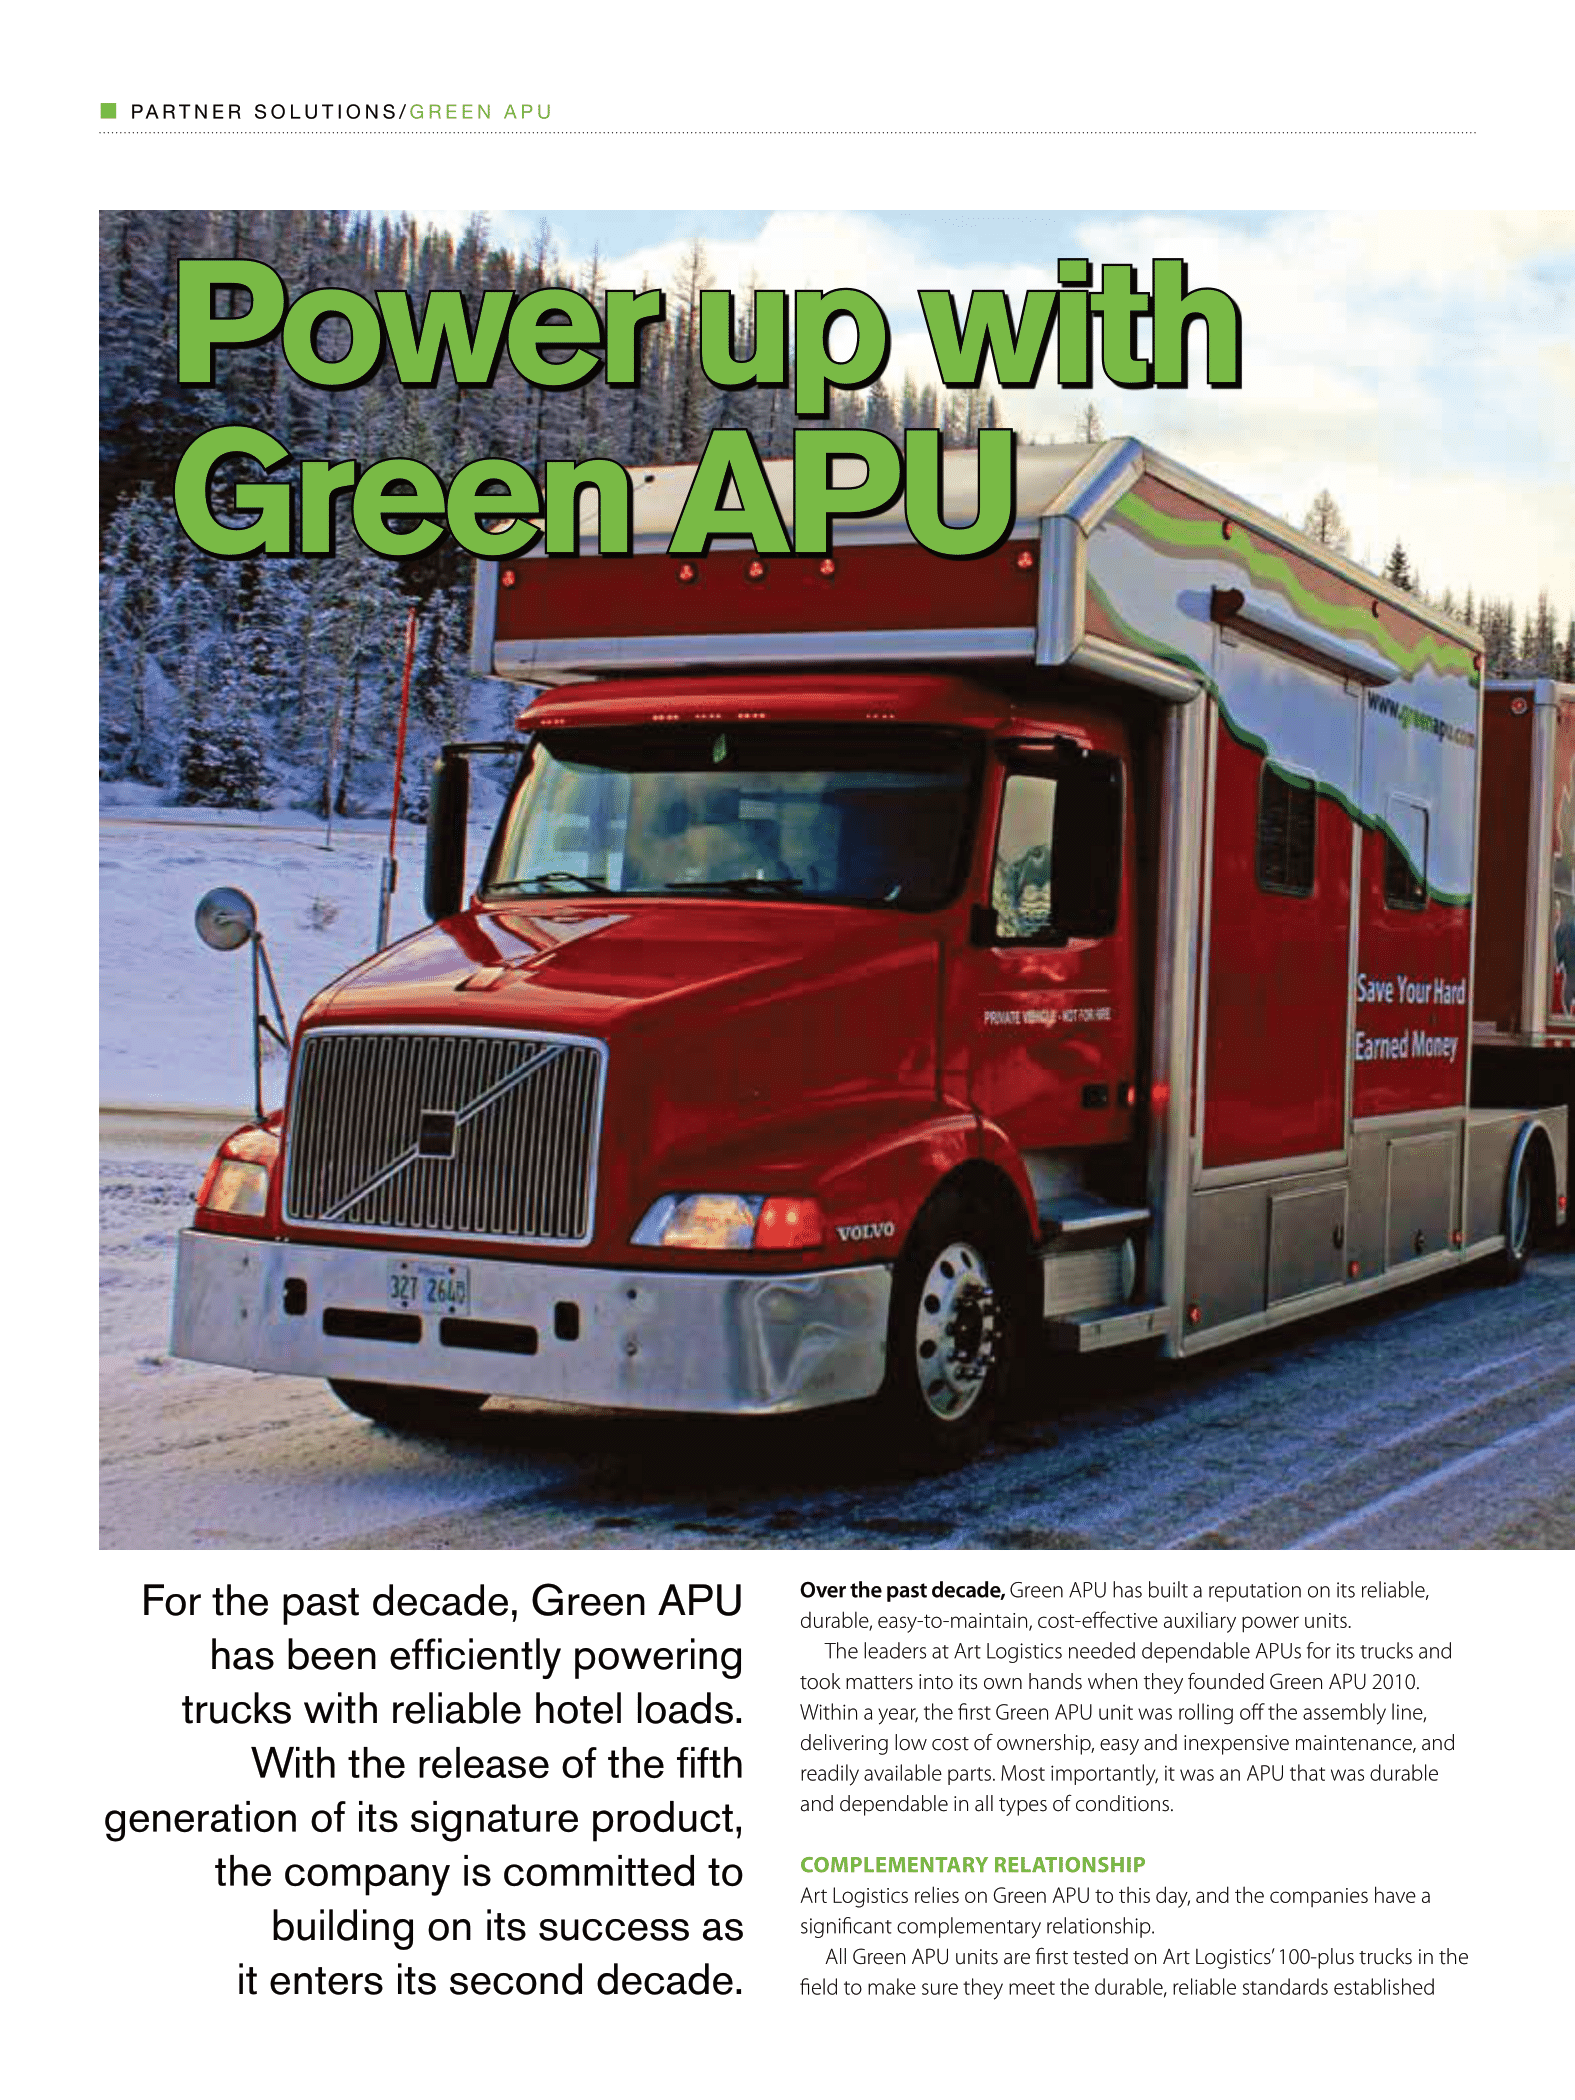 Power up With Green APU Page One - Rome, NY - R.B. Humphreys, Inc.